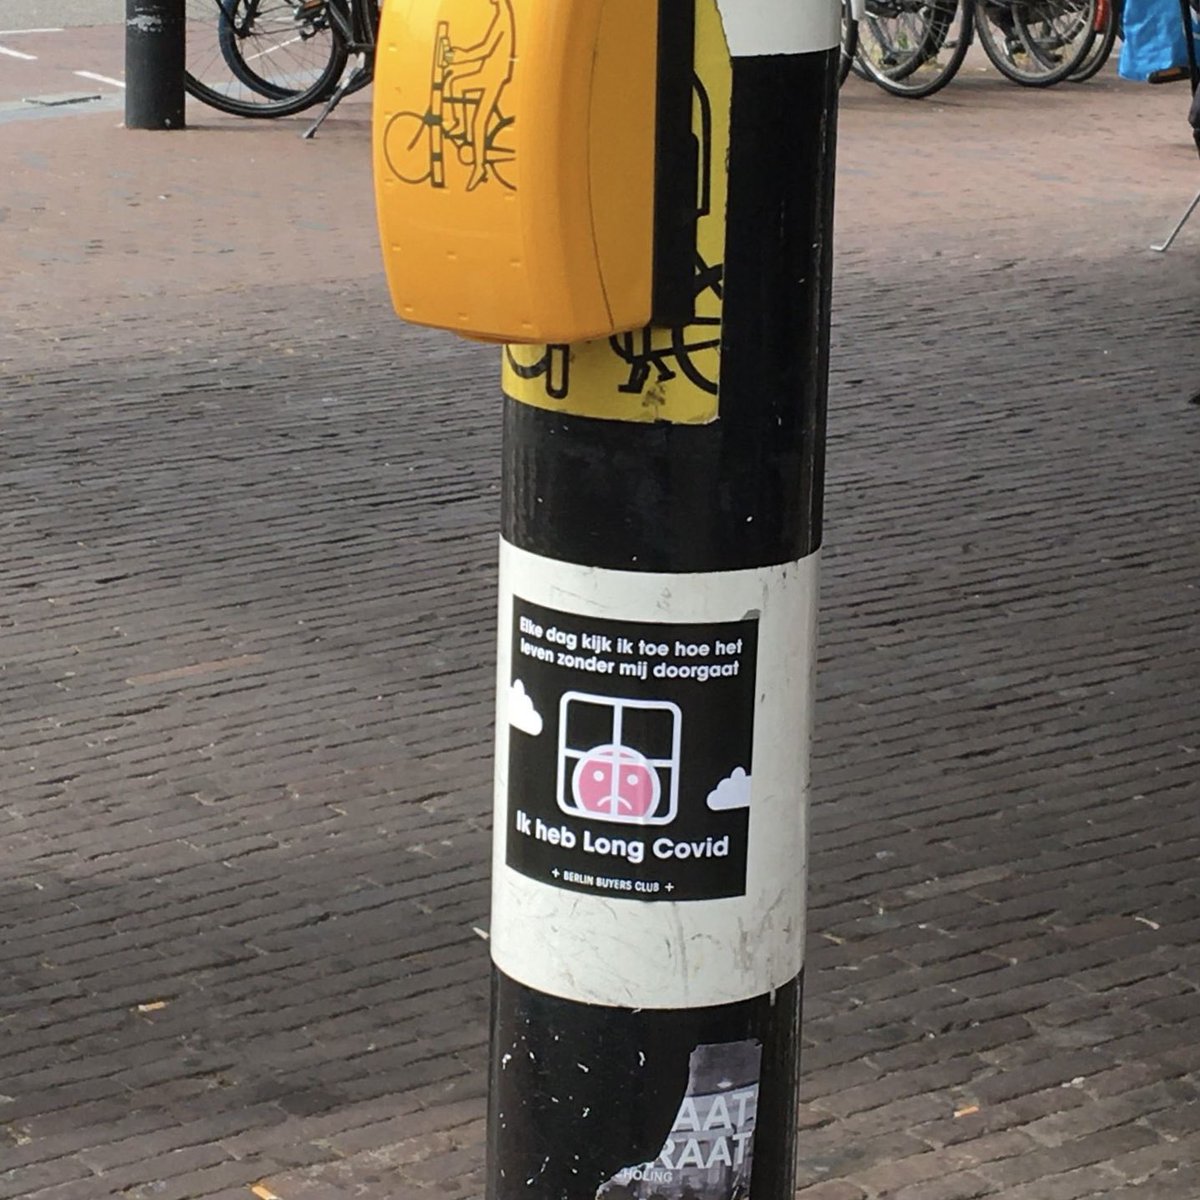 📍Leiden, The Netherlands

🇬🇧 “Every day I watch as life goes on without me, I have Long Covid”

#LongCovid #LongCovidAwareness

#LetsStickTogether 

(spotted by someone in Leiden, sticker = @BerlinBuyers)